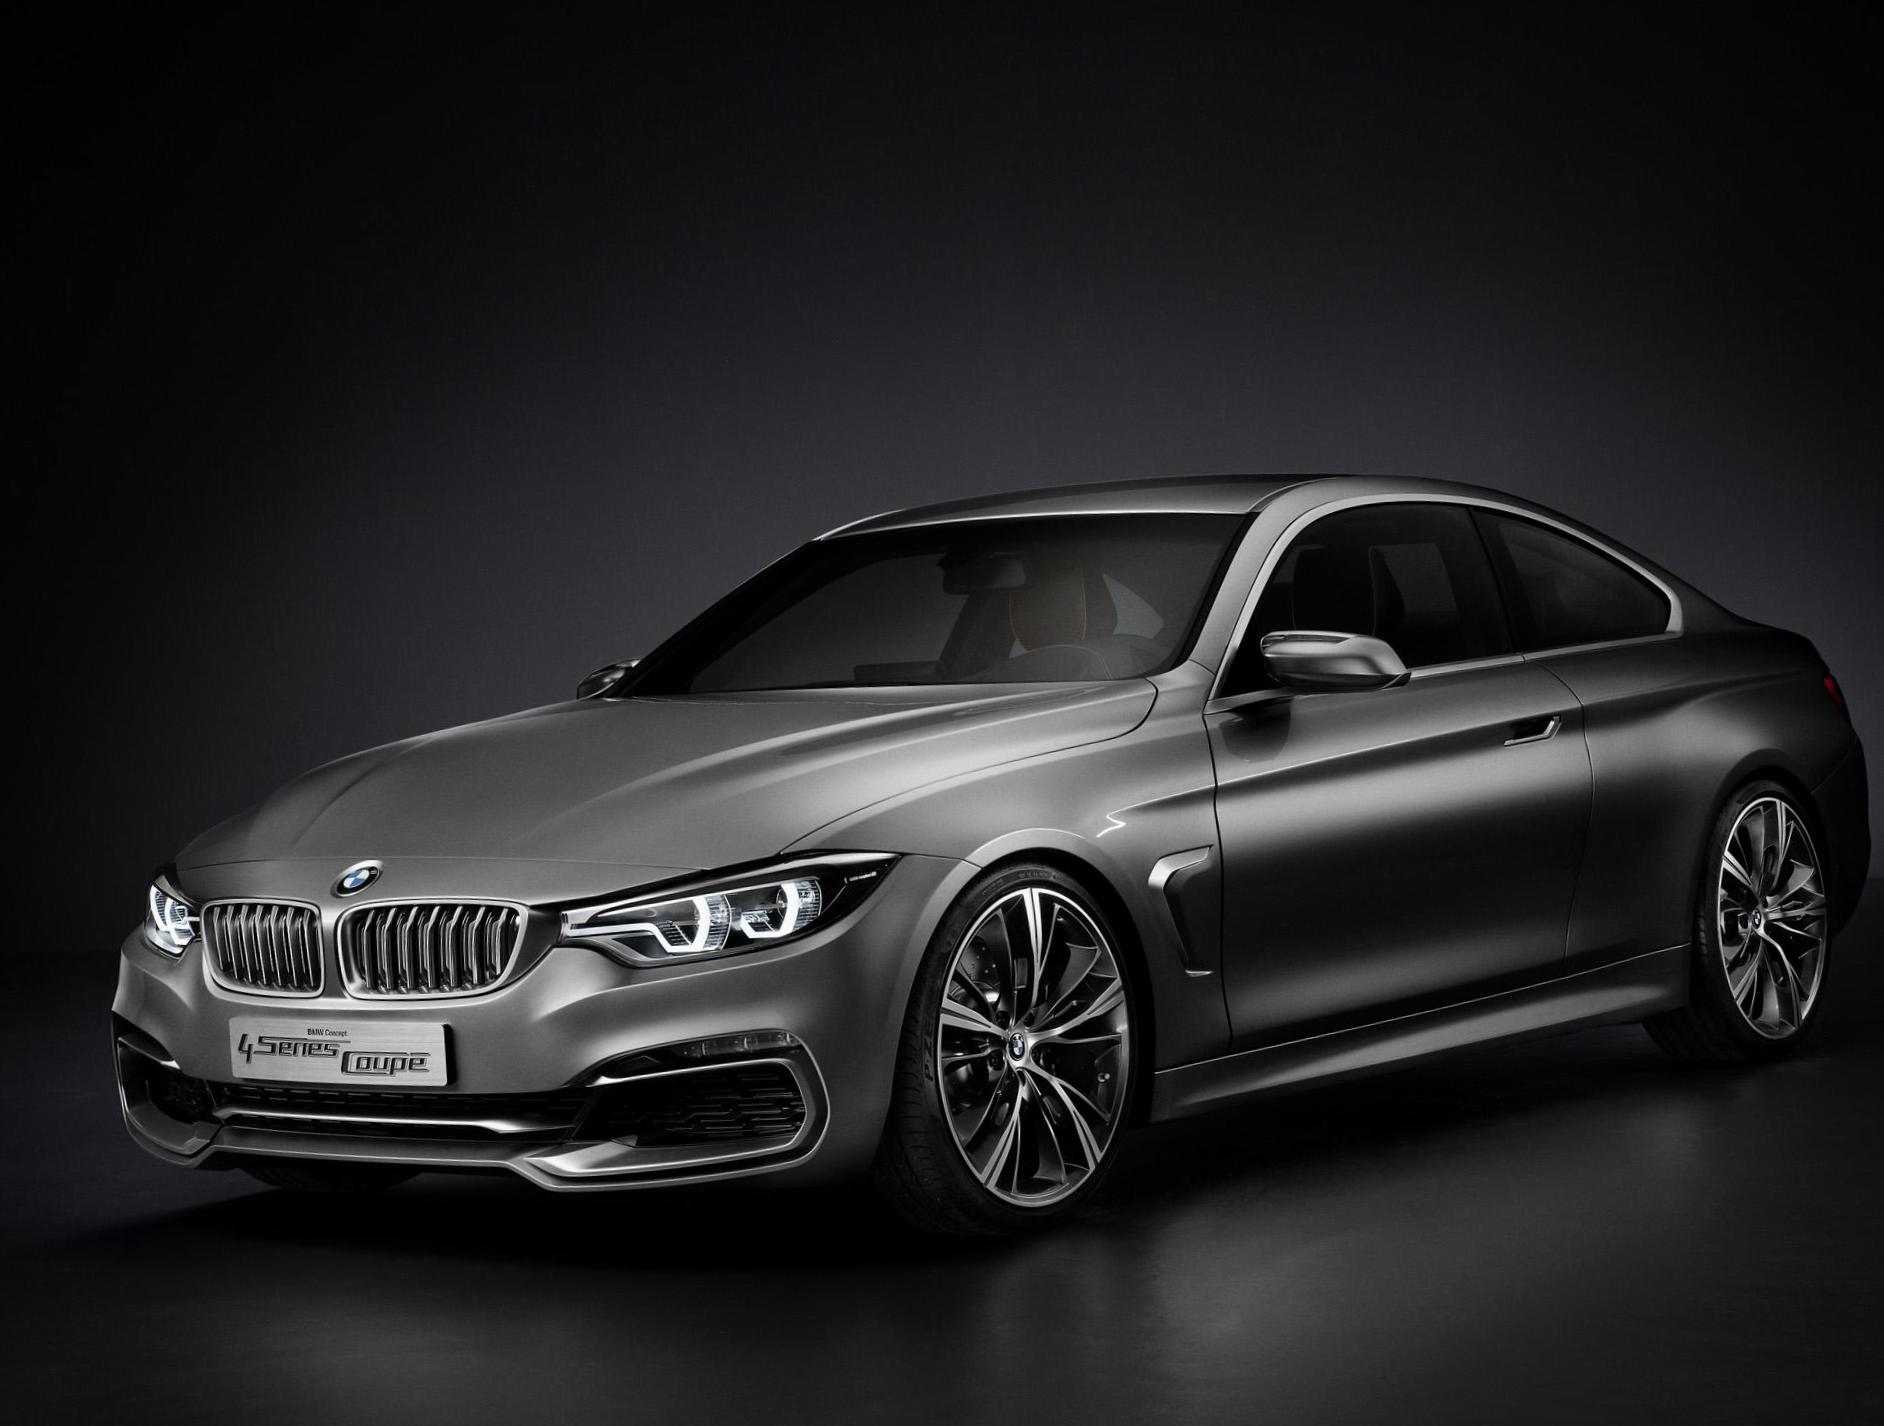 BMW 4 Series Coupe (F32) configuration 2012